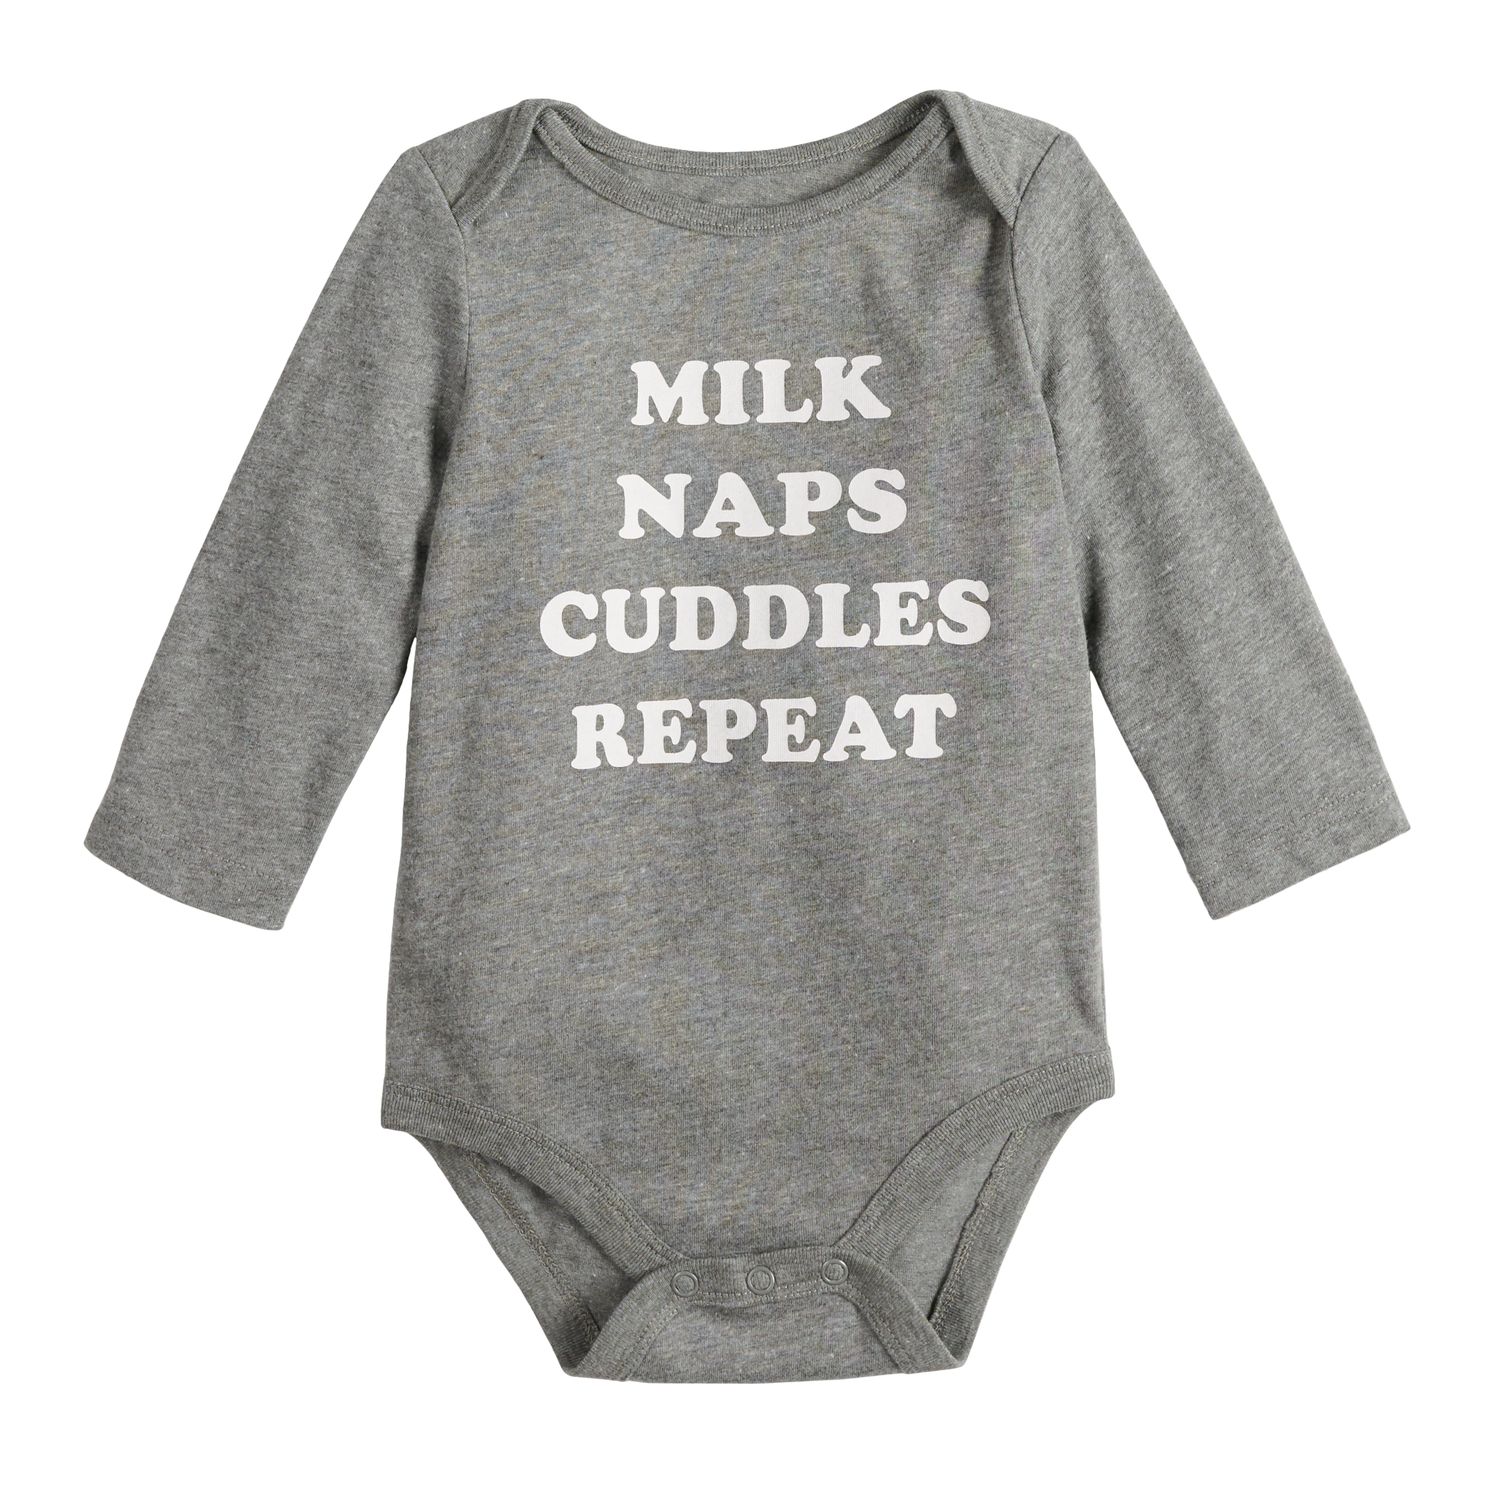 neutral baby clothes sale